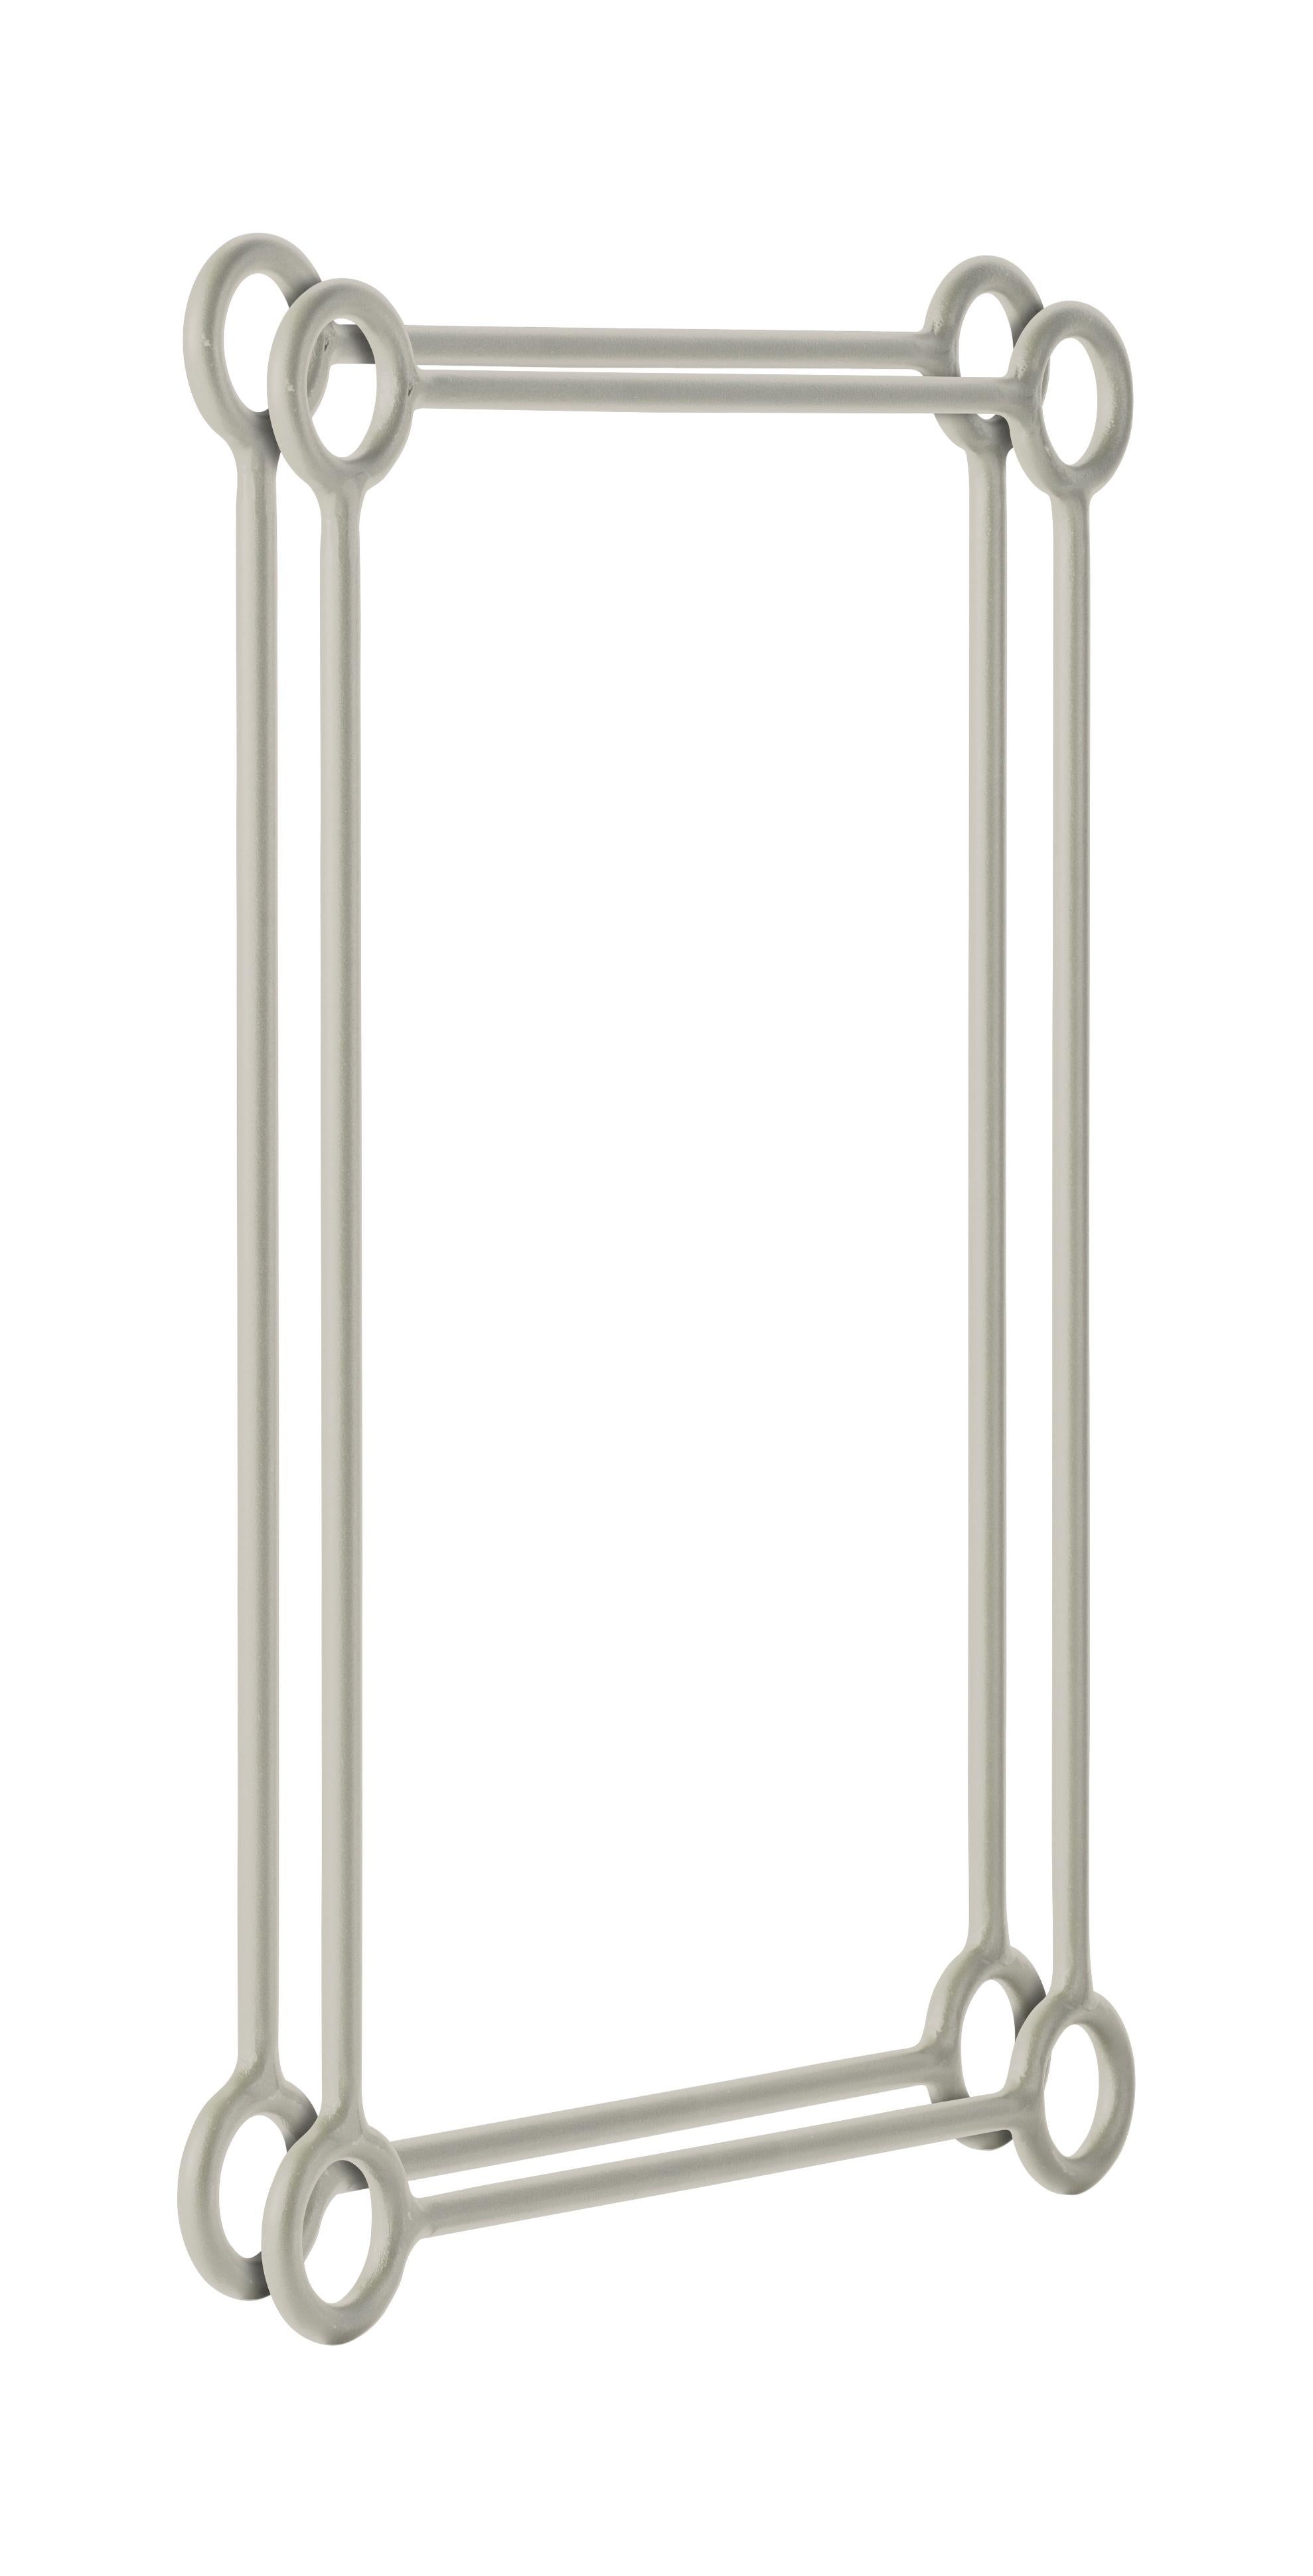 For Sale: White (Warm White) Extension for Parade Shelf, by Morten & Jonas from Warm Nordic